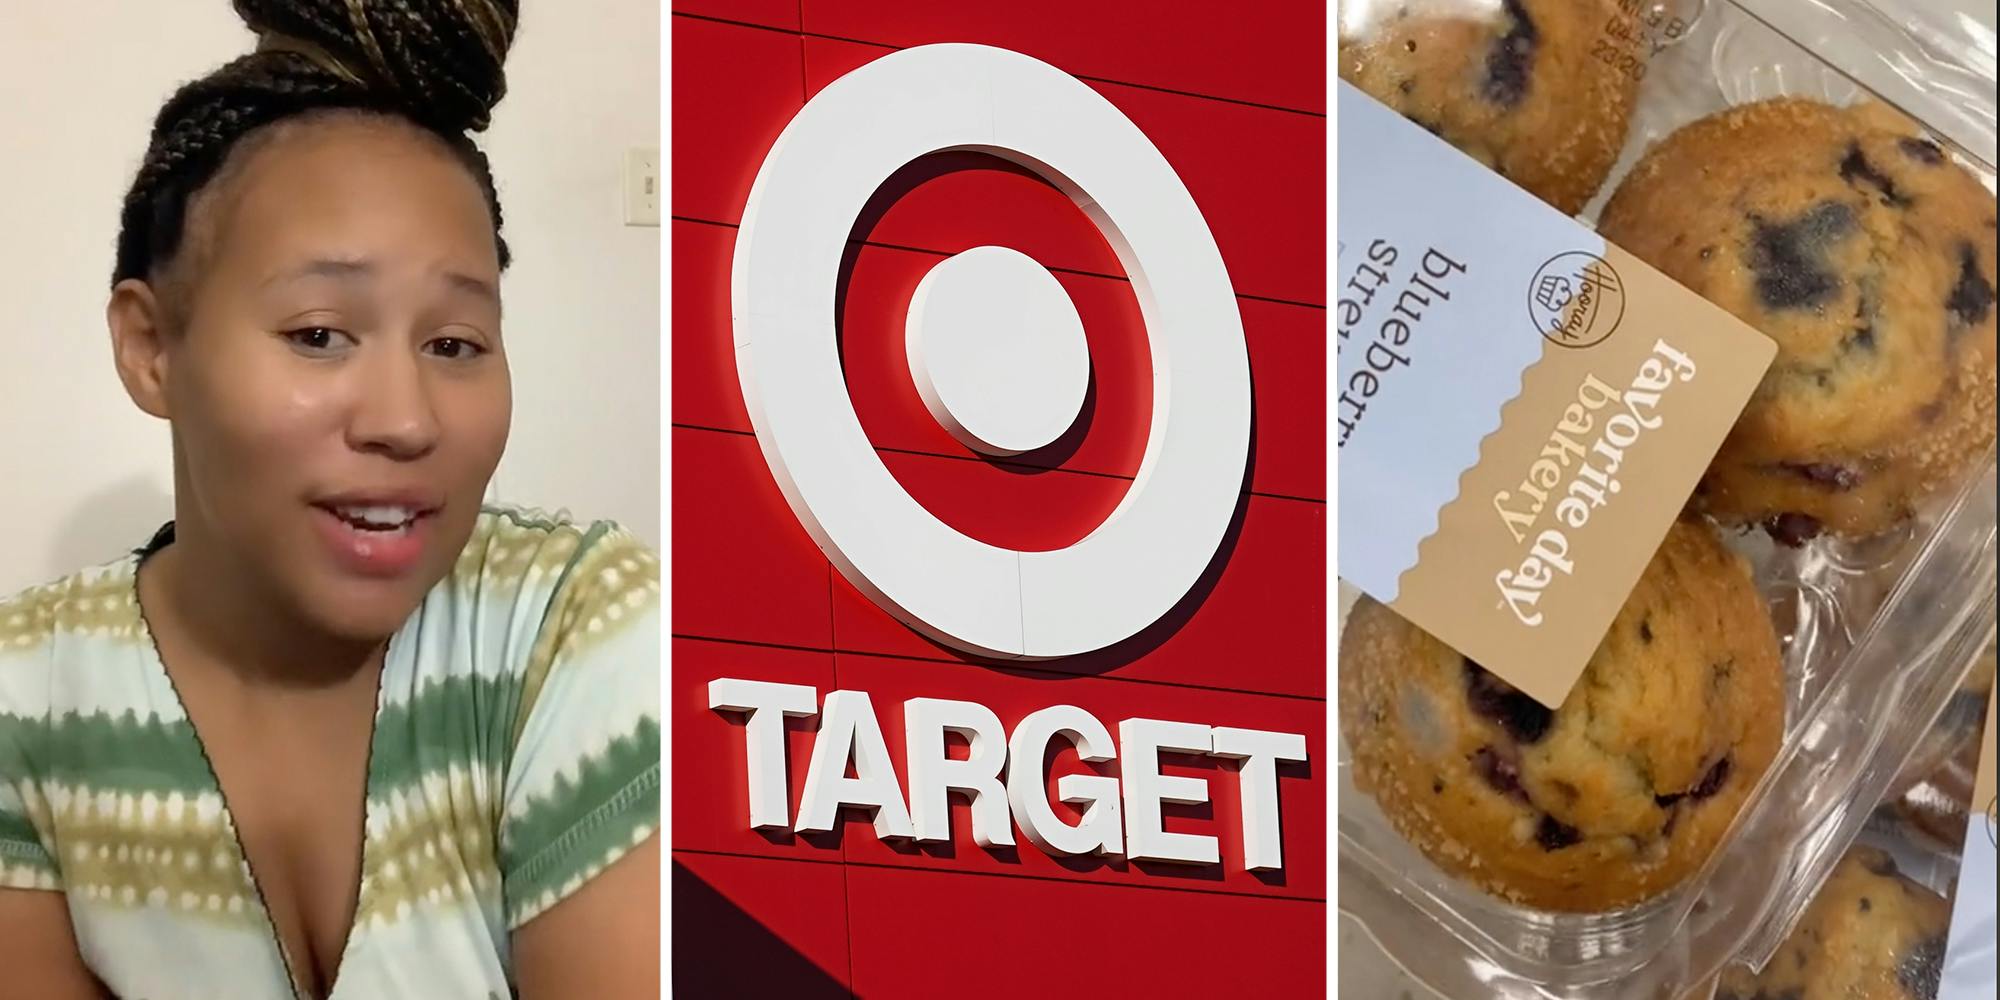 ‘That’s why you don’t buy food from Target’: Shopper goes to Target to return moldy muffins. Then she catches them selling more on the shelf